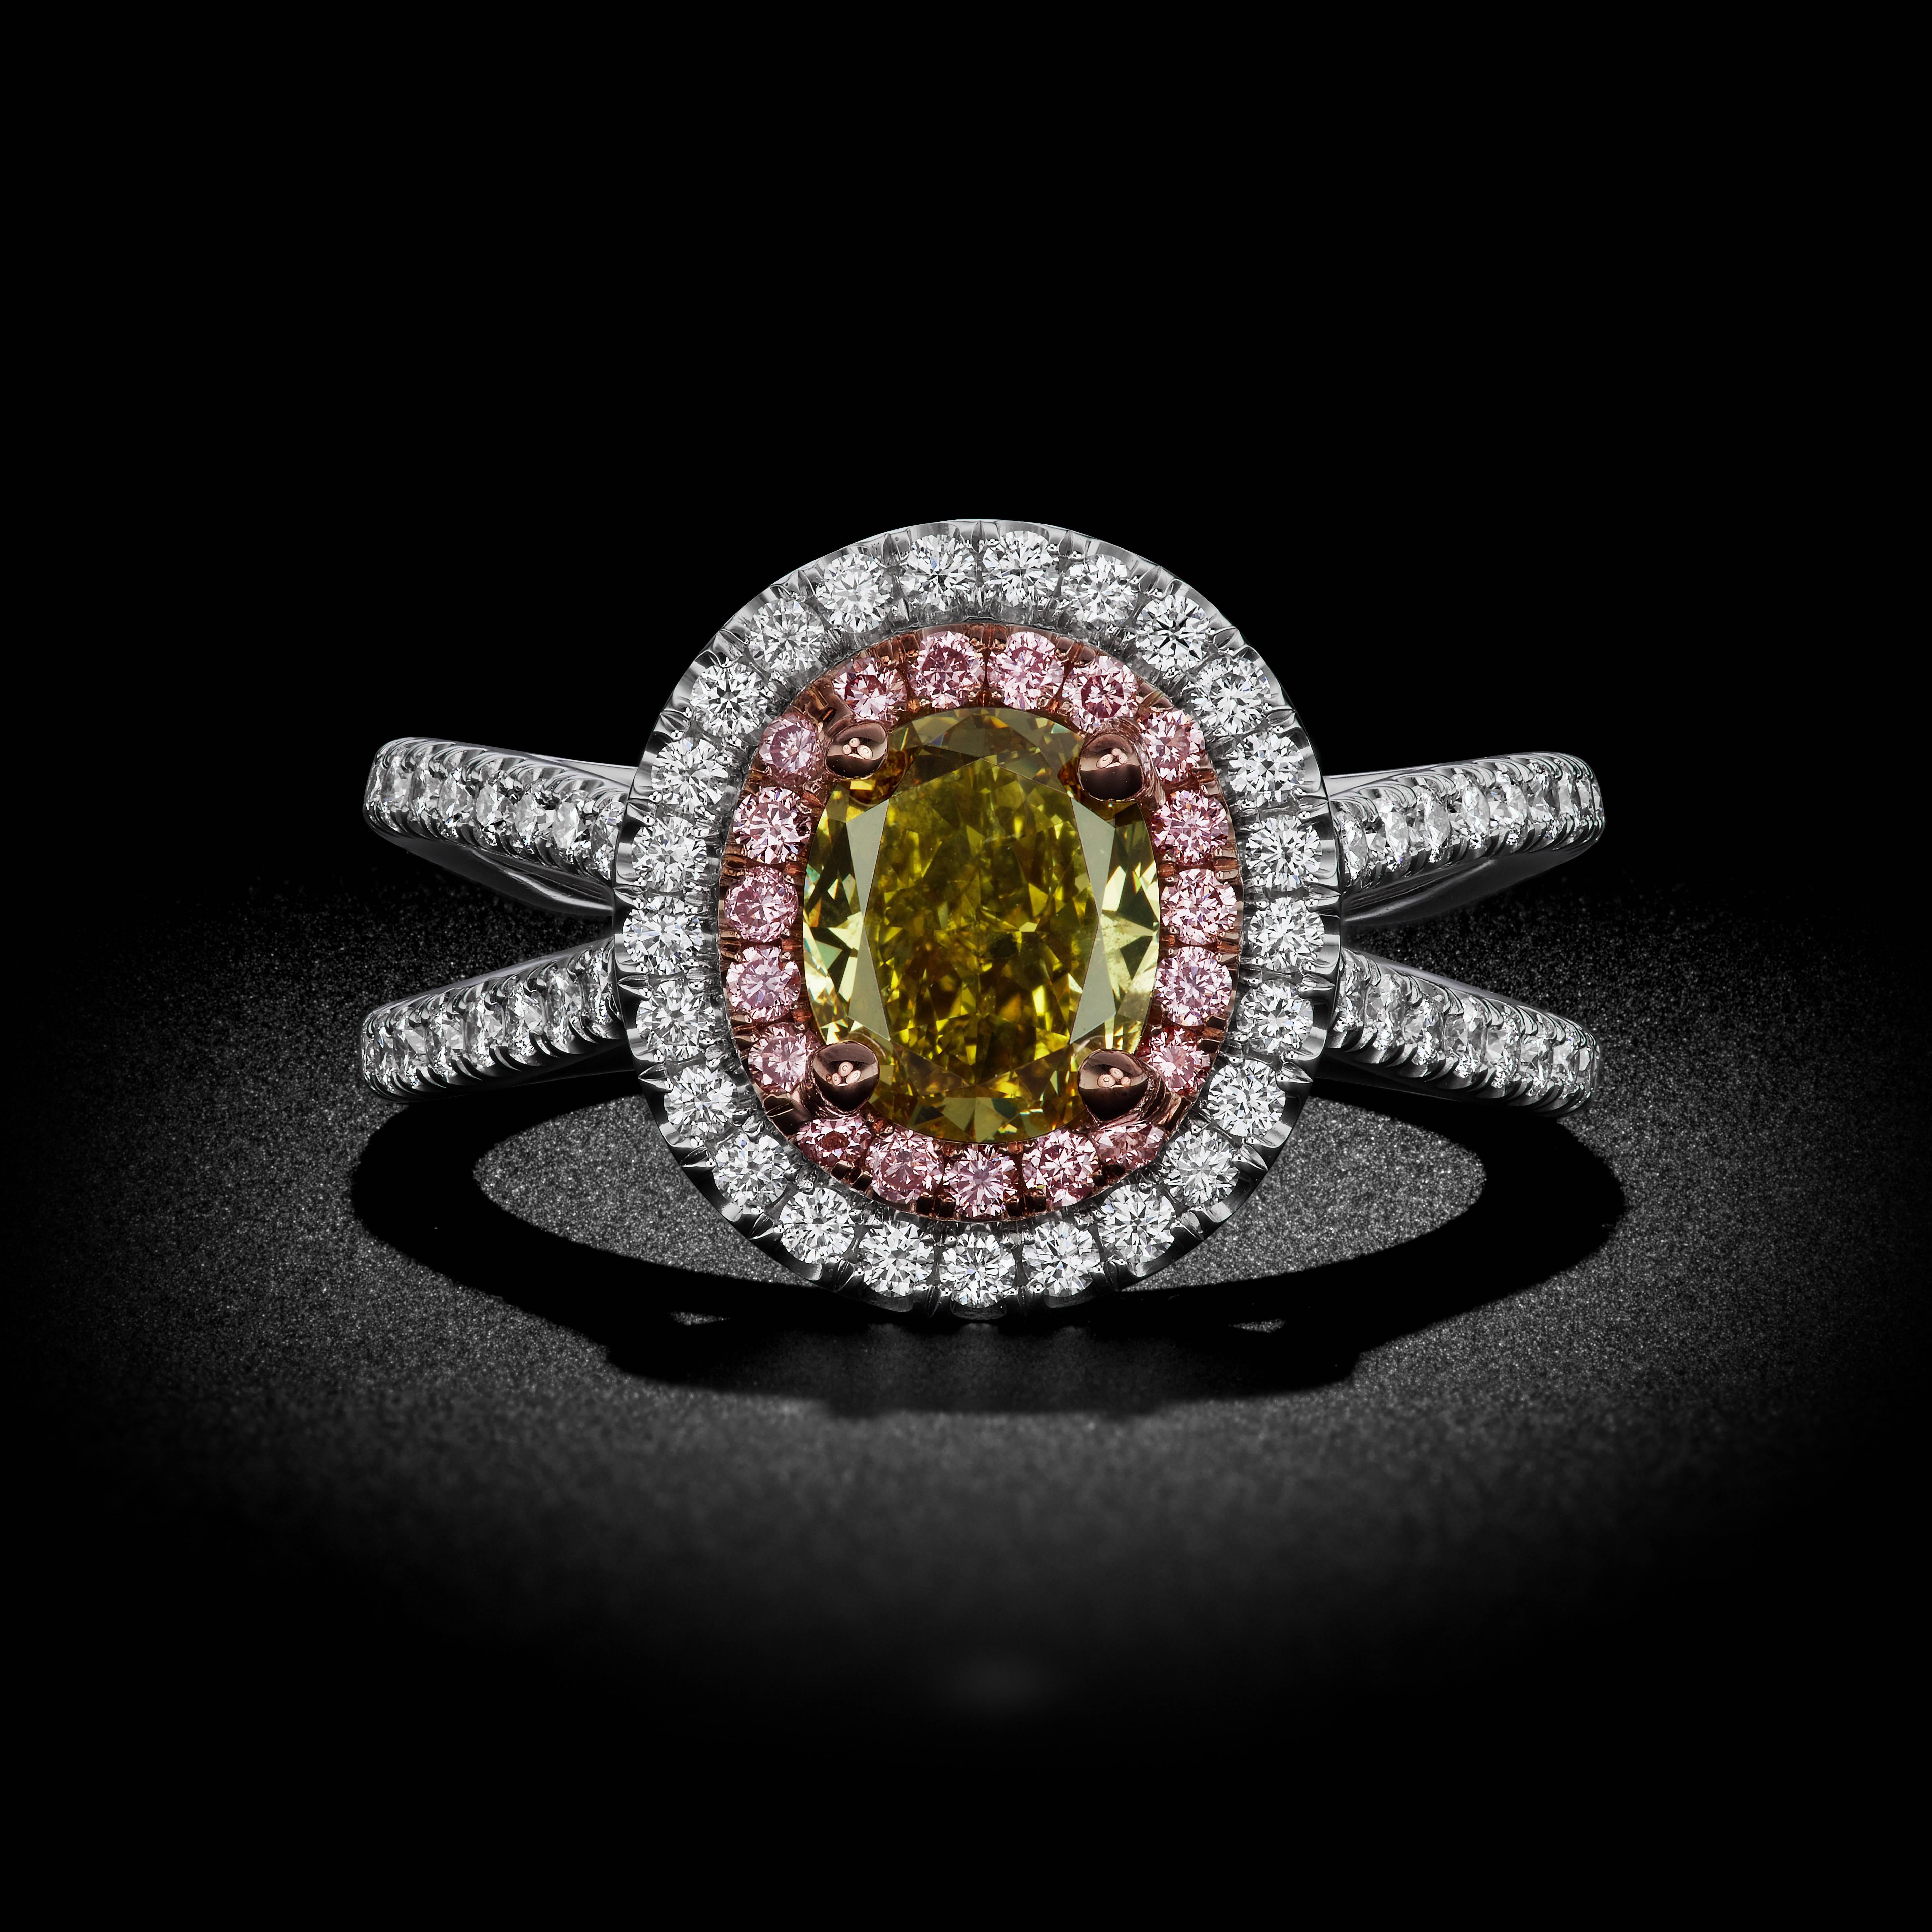 This rare gem shows vibrant shades of Fancy Deep Gray, Green, and Yellow tones in an Oval faceted shape. Accompanied with a GIA Certification. Pink and White diamonds brings this look together with an elegant double halo for a classic and luxurious